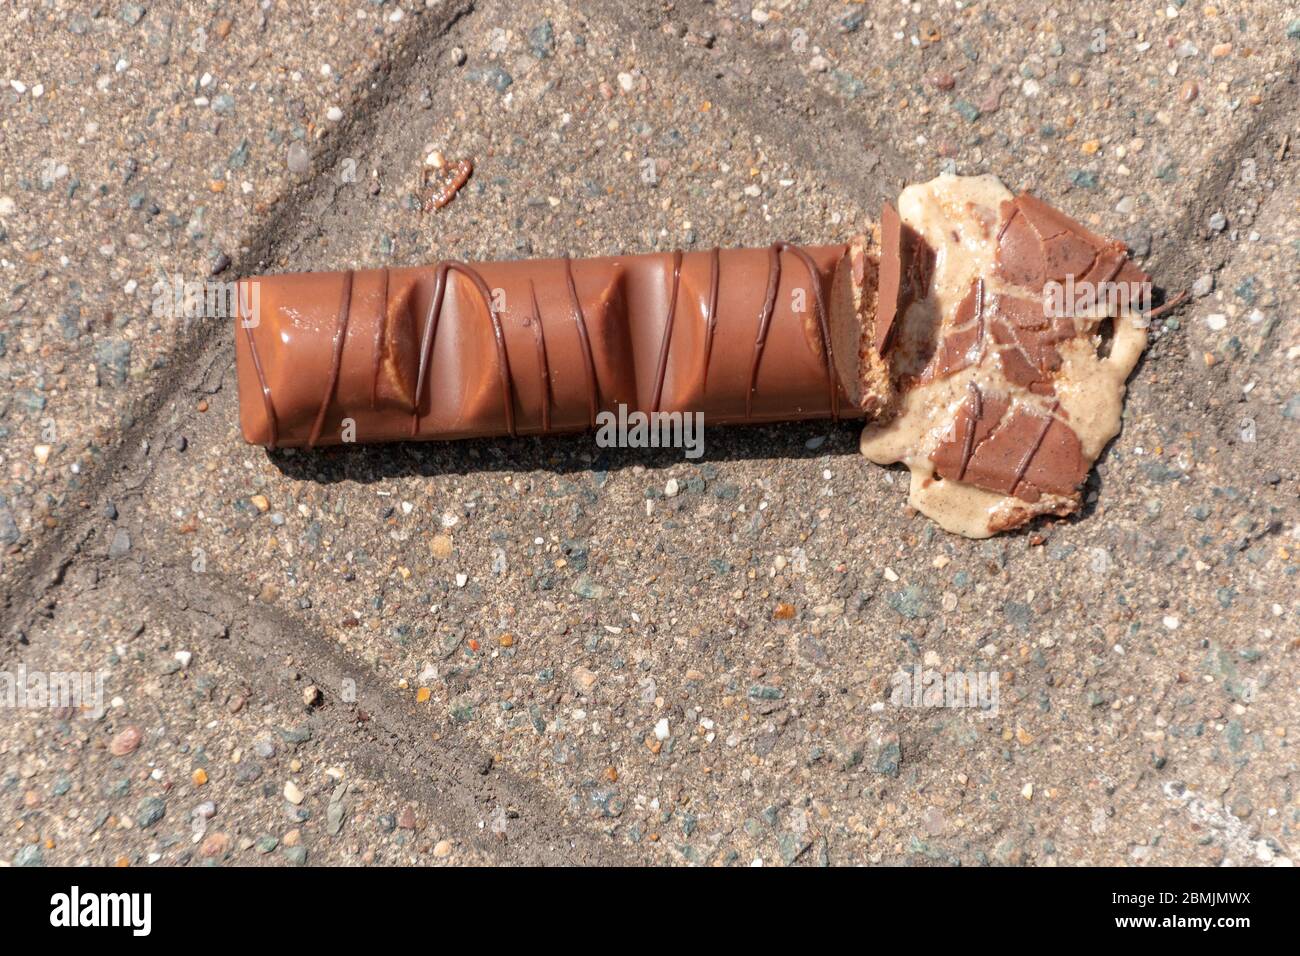 a close up view of a bar of chocolate that has been dropped and squashed on the one side Stock Photo